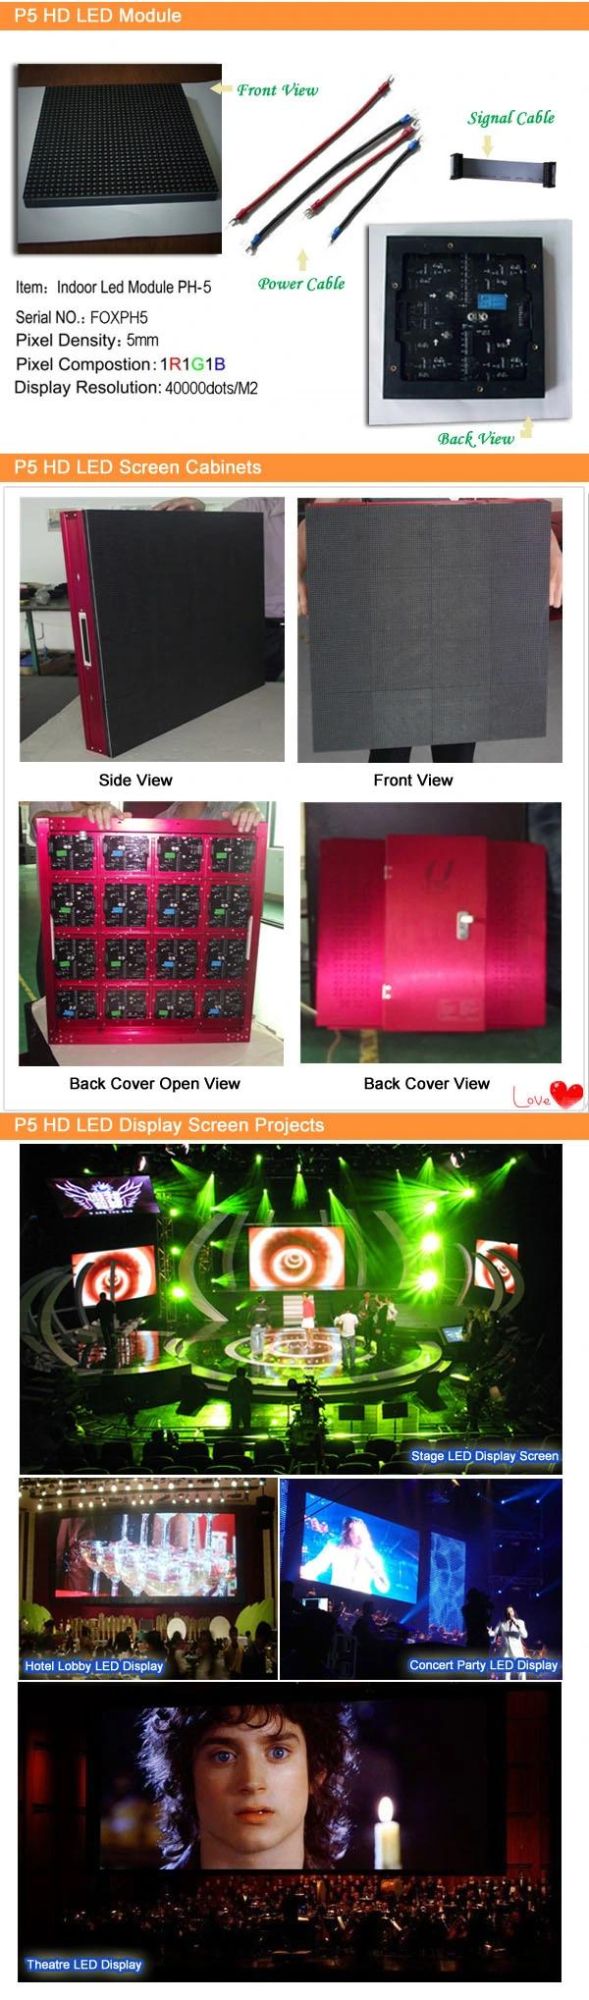 New Products Express Indoor P5 LED Screen